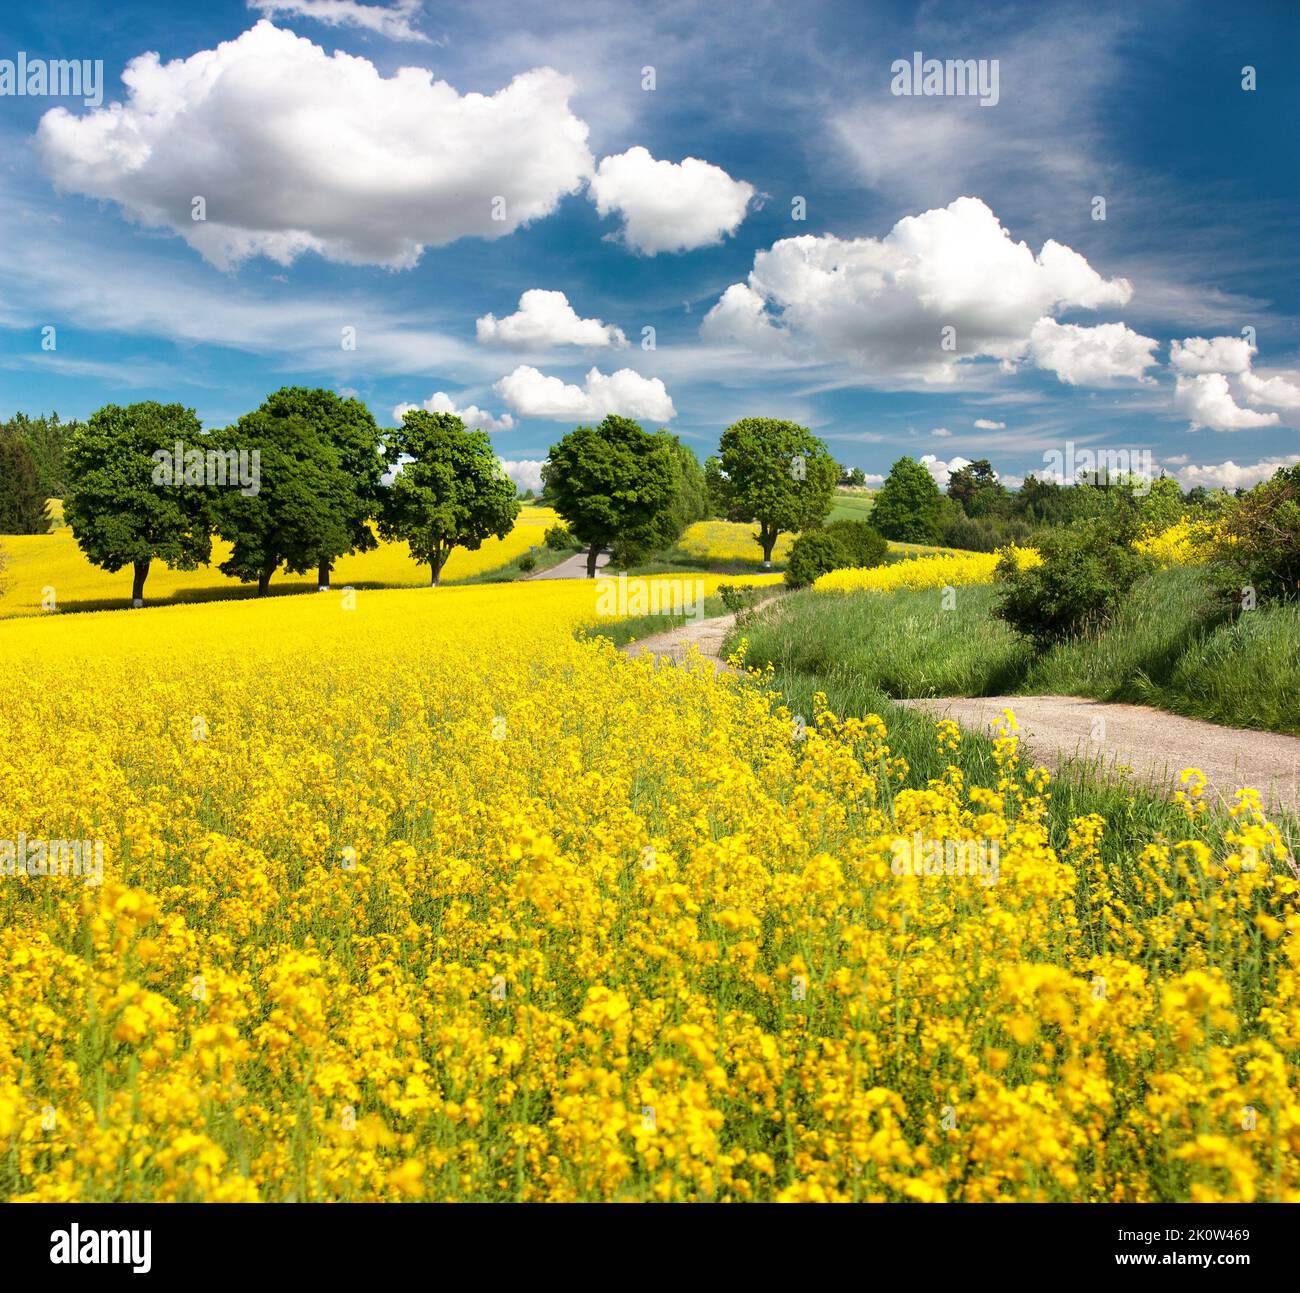 Field of rapeseed, canola or colza in Latin Brassica napus with rural road, alley and beautiful cloudy sky, rape seed is plant for green energy and oi Stock Photo